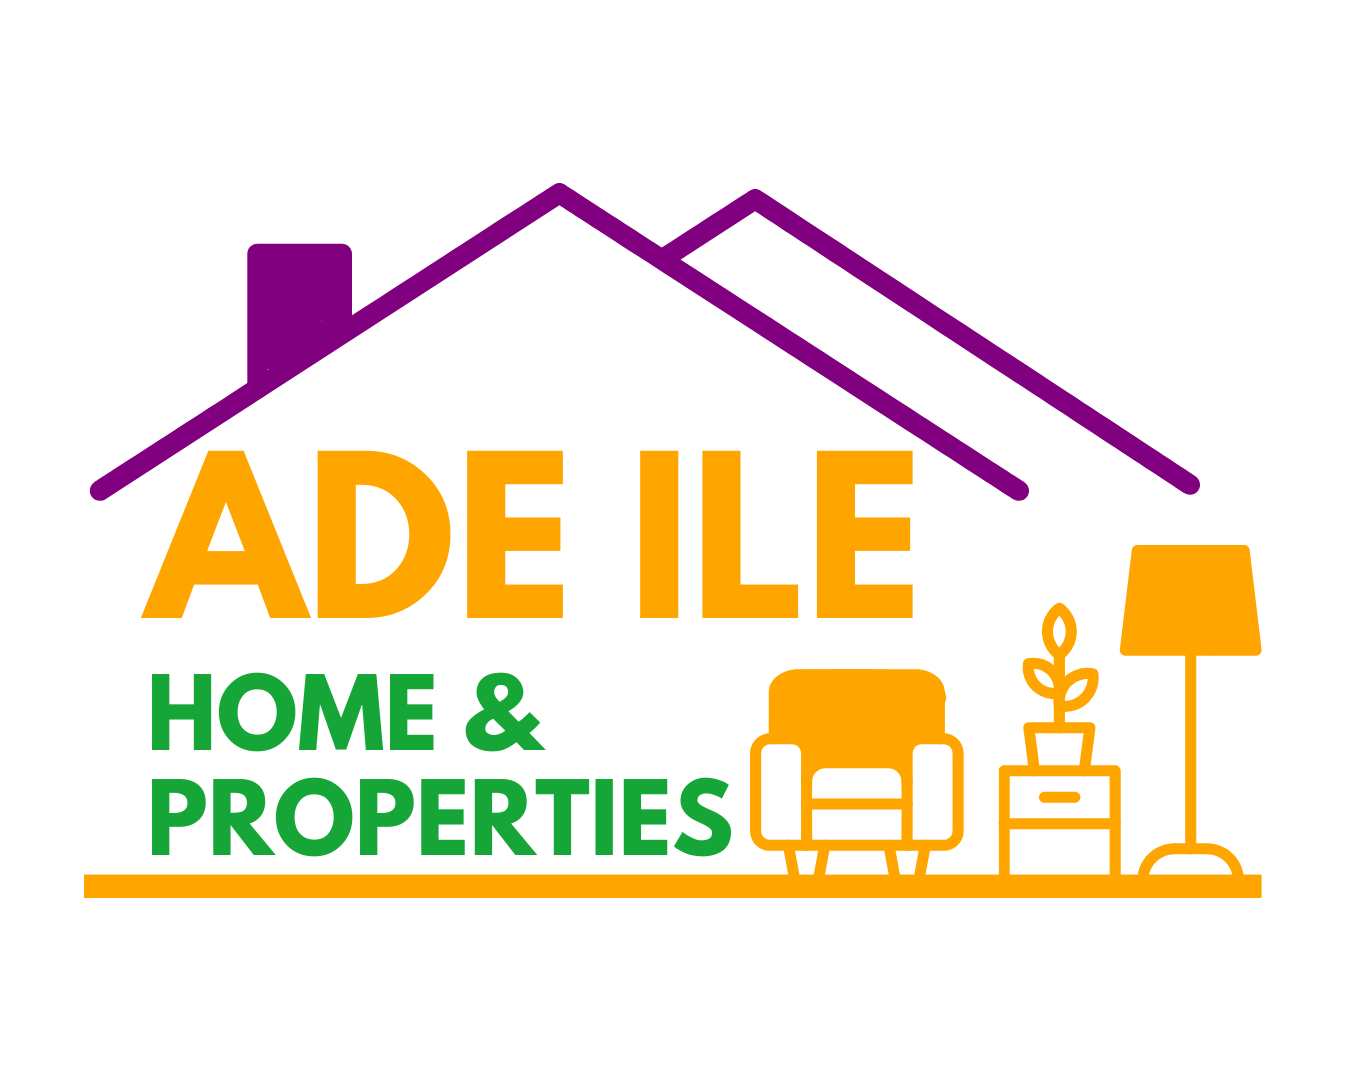 Ade Ile Home & Properties.png